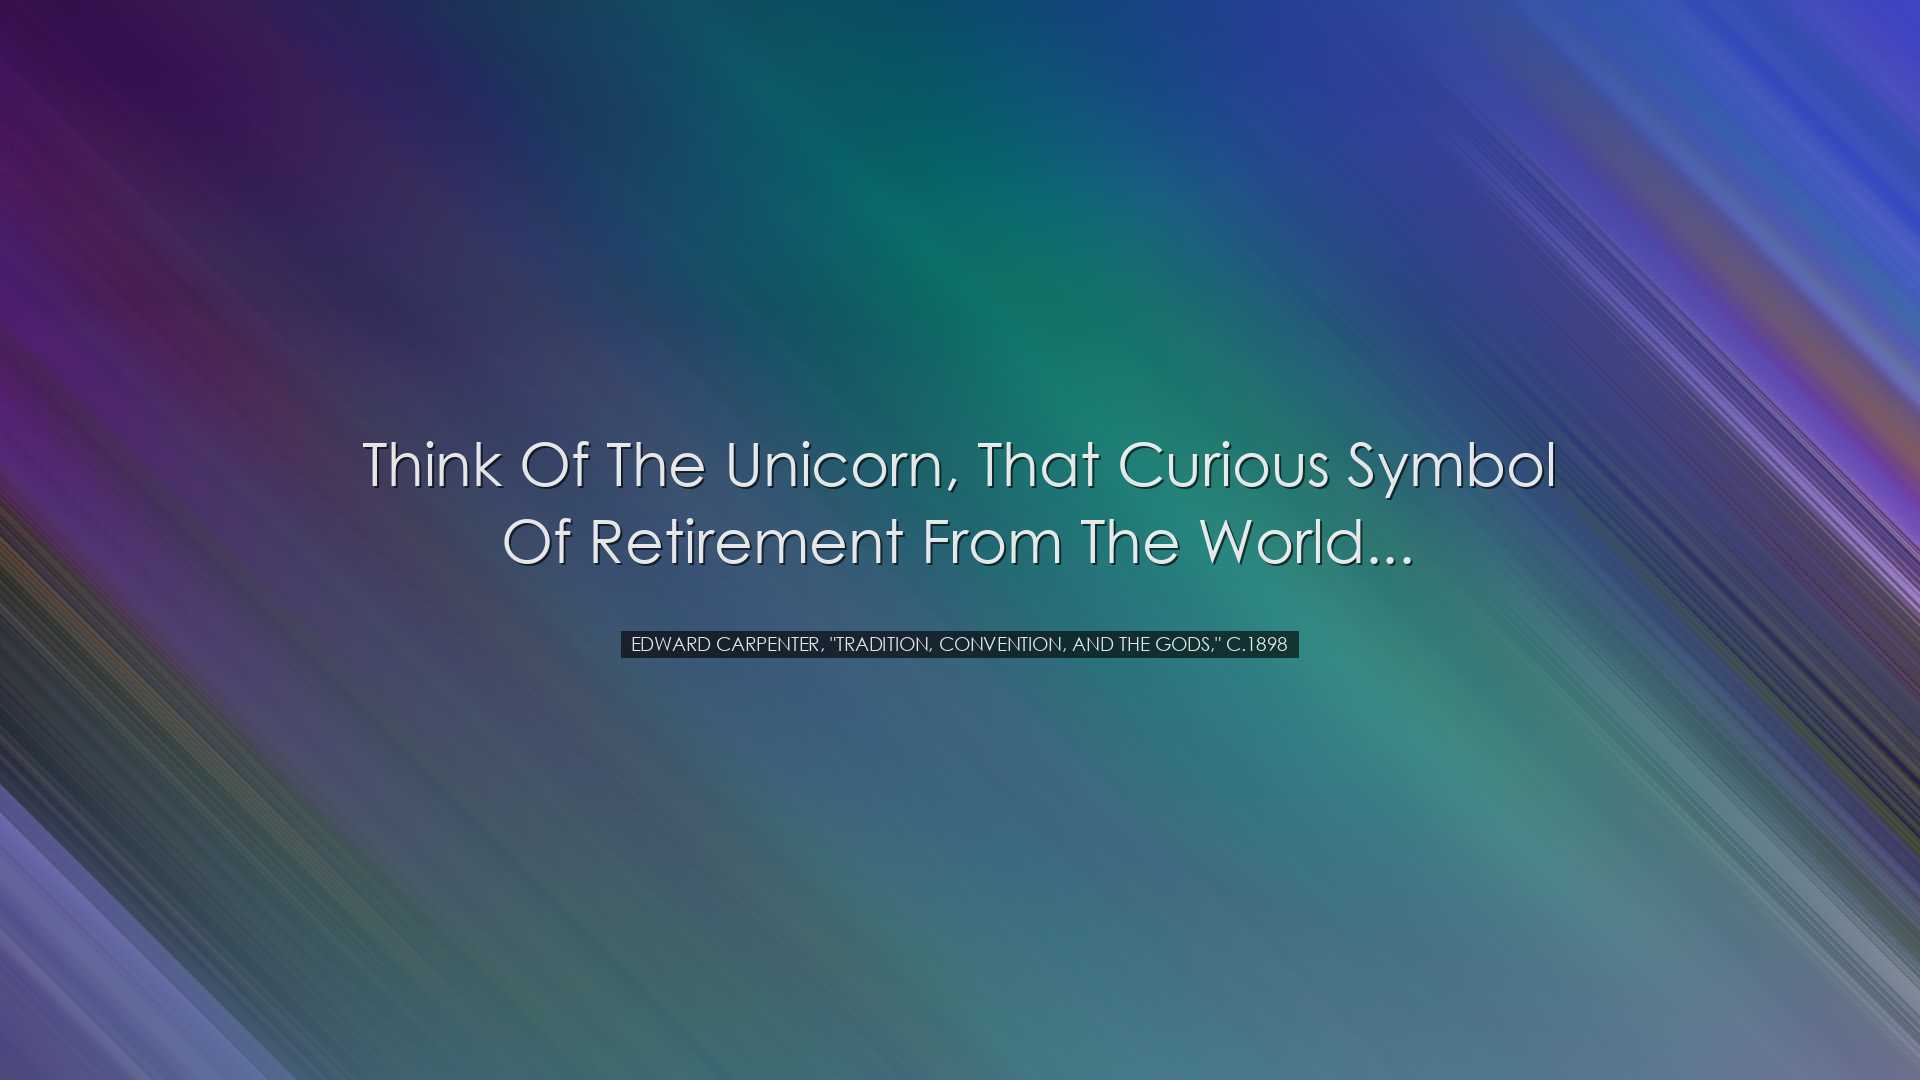 Think of the Unicorn, that curious symbol of retirement from the w